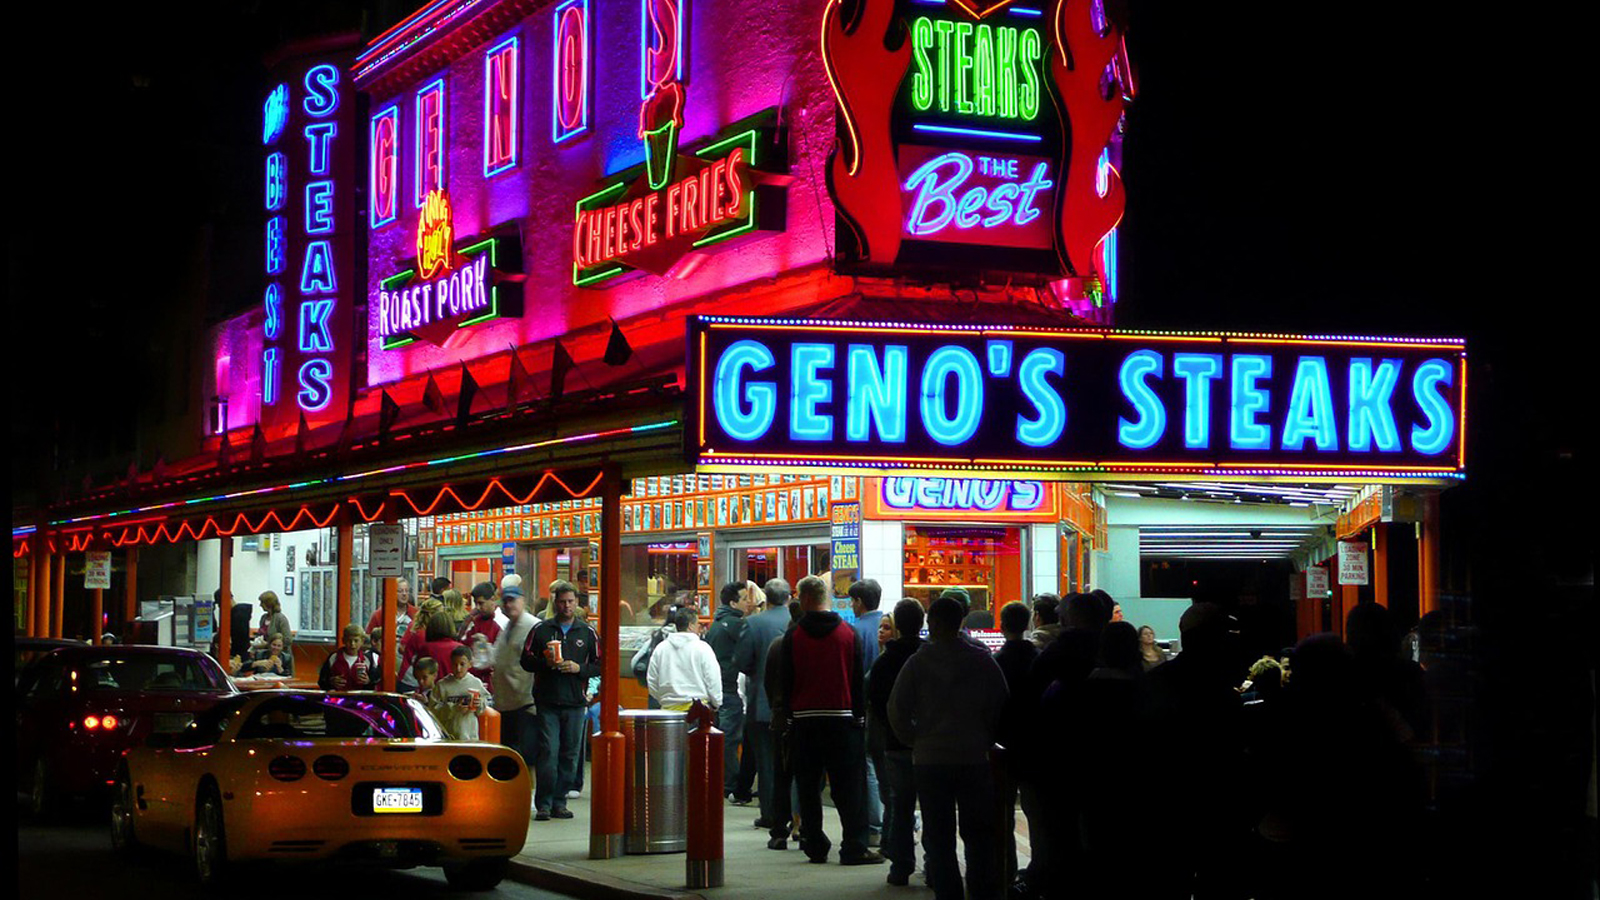 Eat Philly Cheesesteak At Geno's Steaks Near Old City - Philadelphia PA